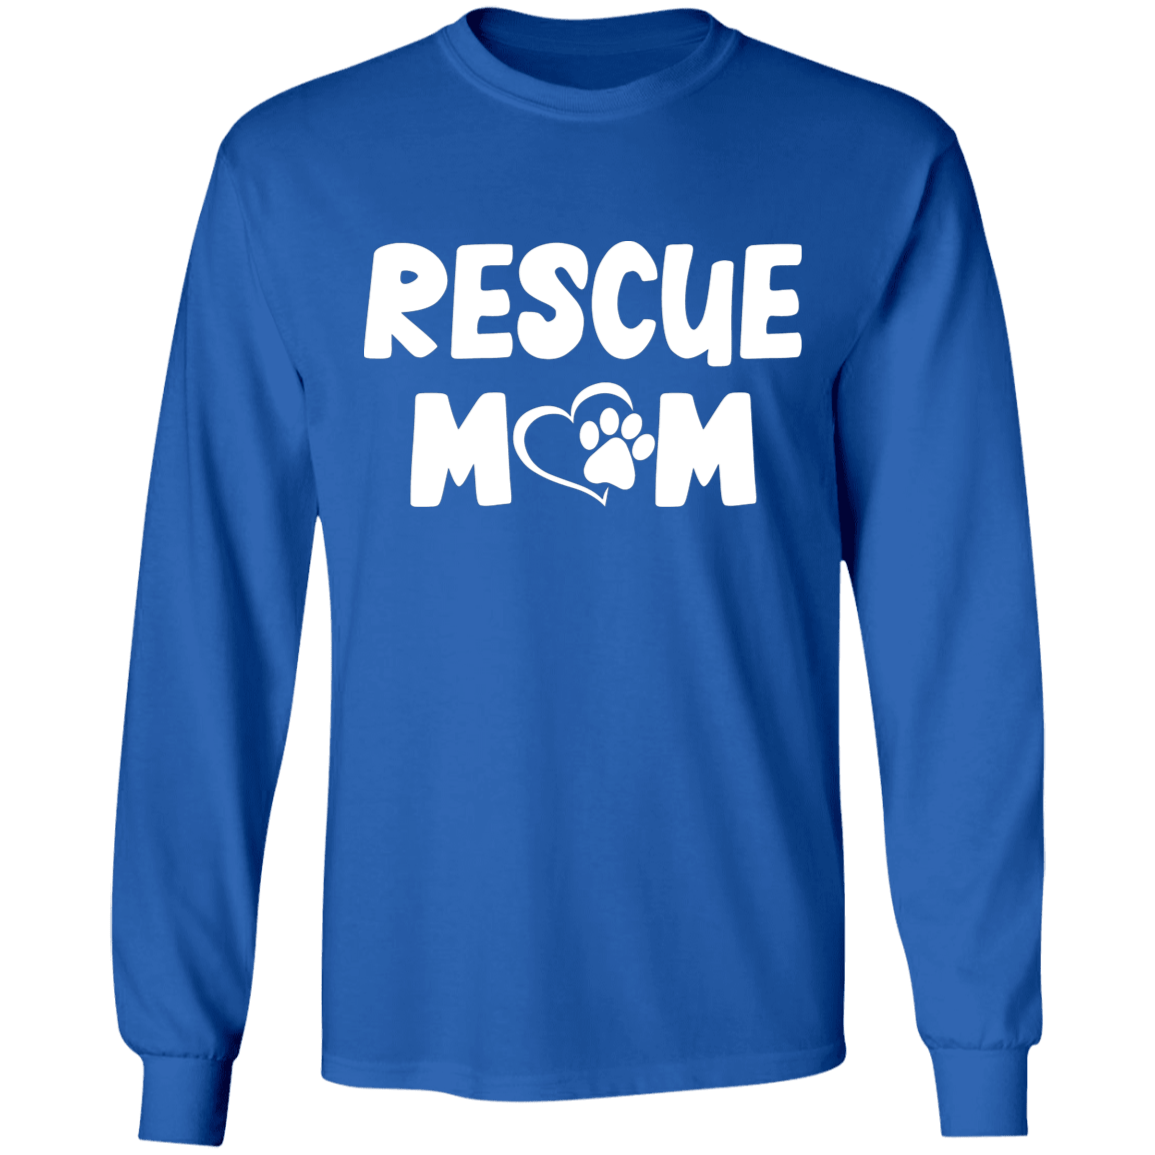 Rescue Mom - Long Sleeve T Shirt.